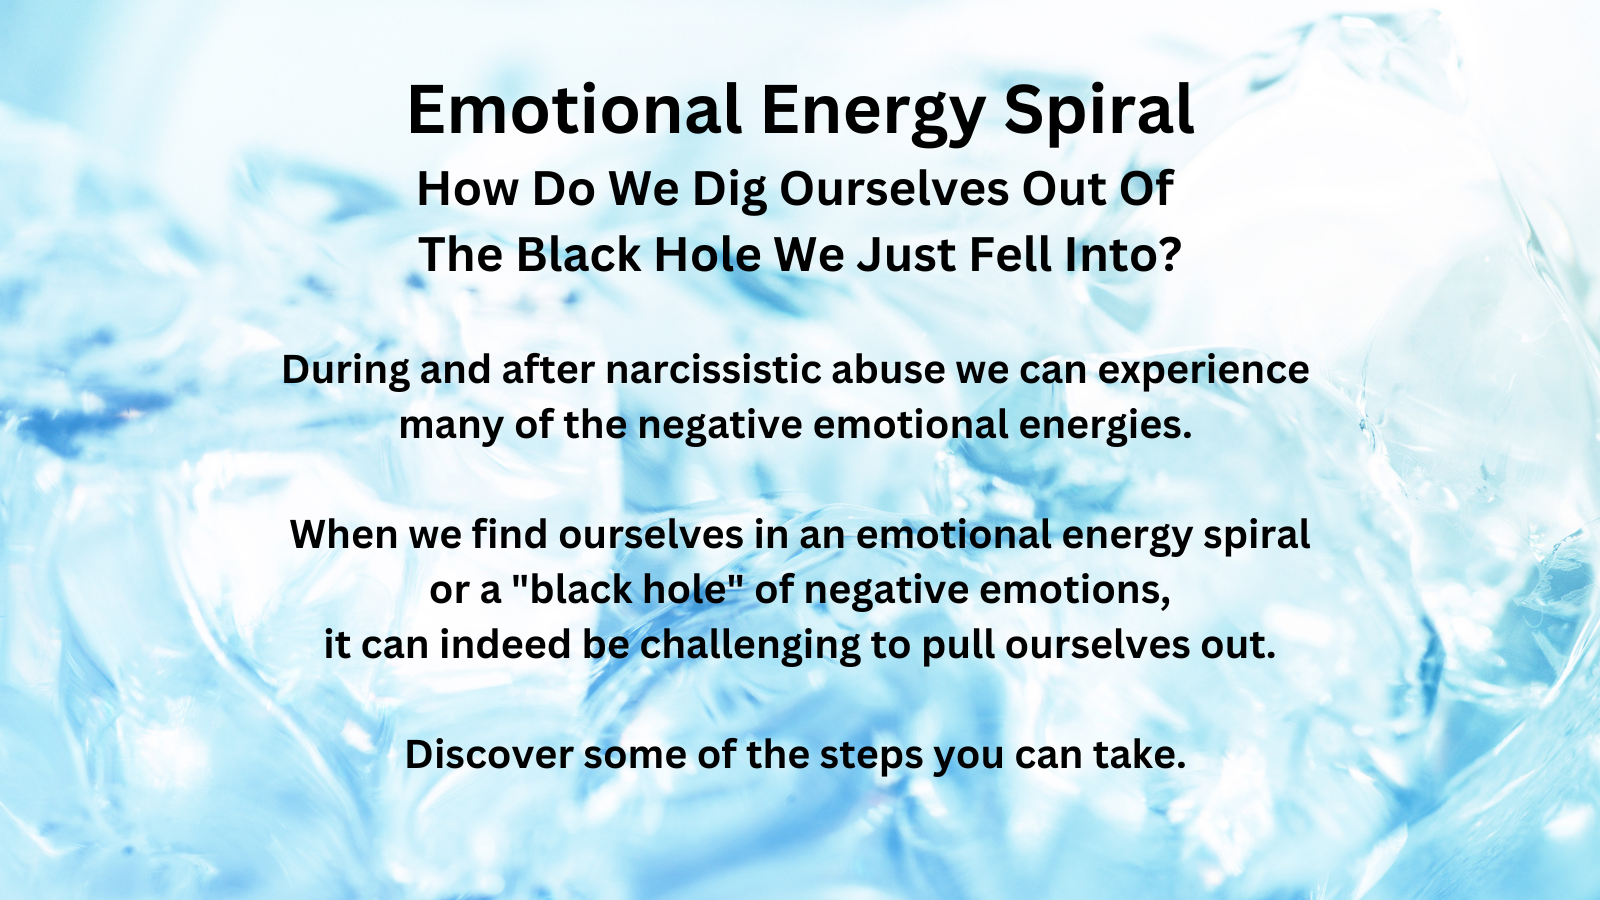 Emotional Energy Spiral post introduction